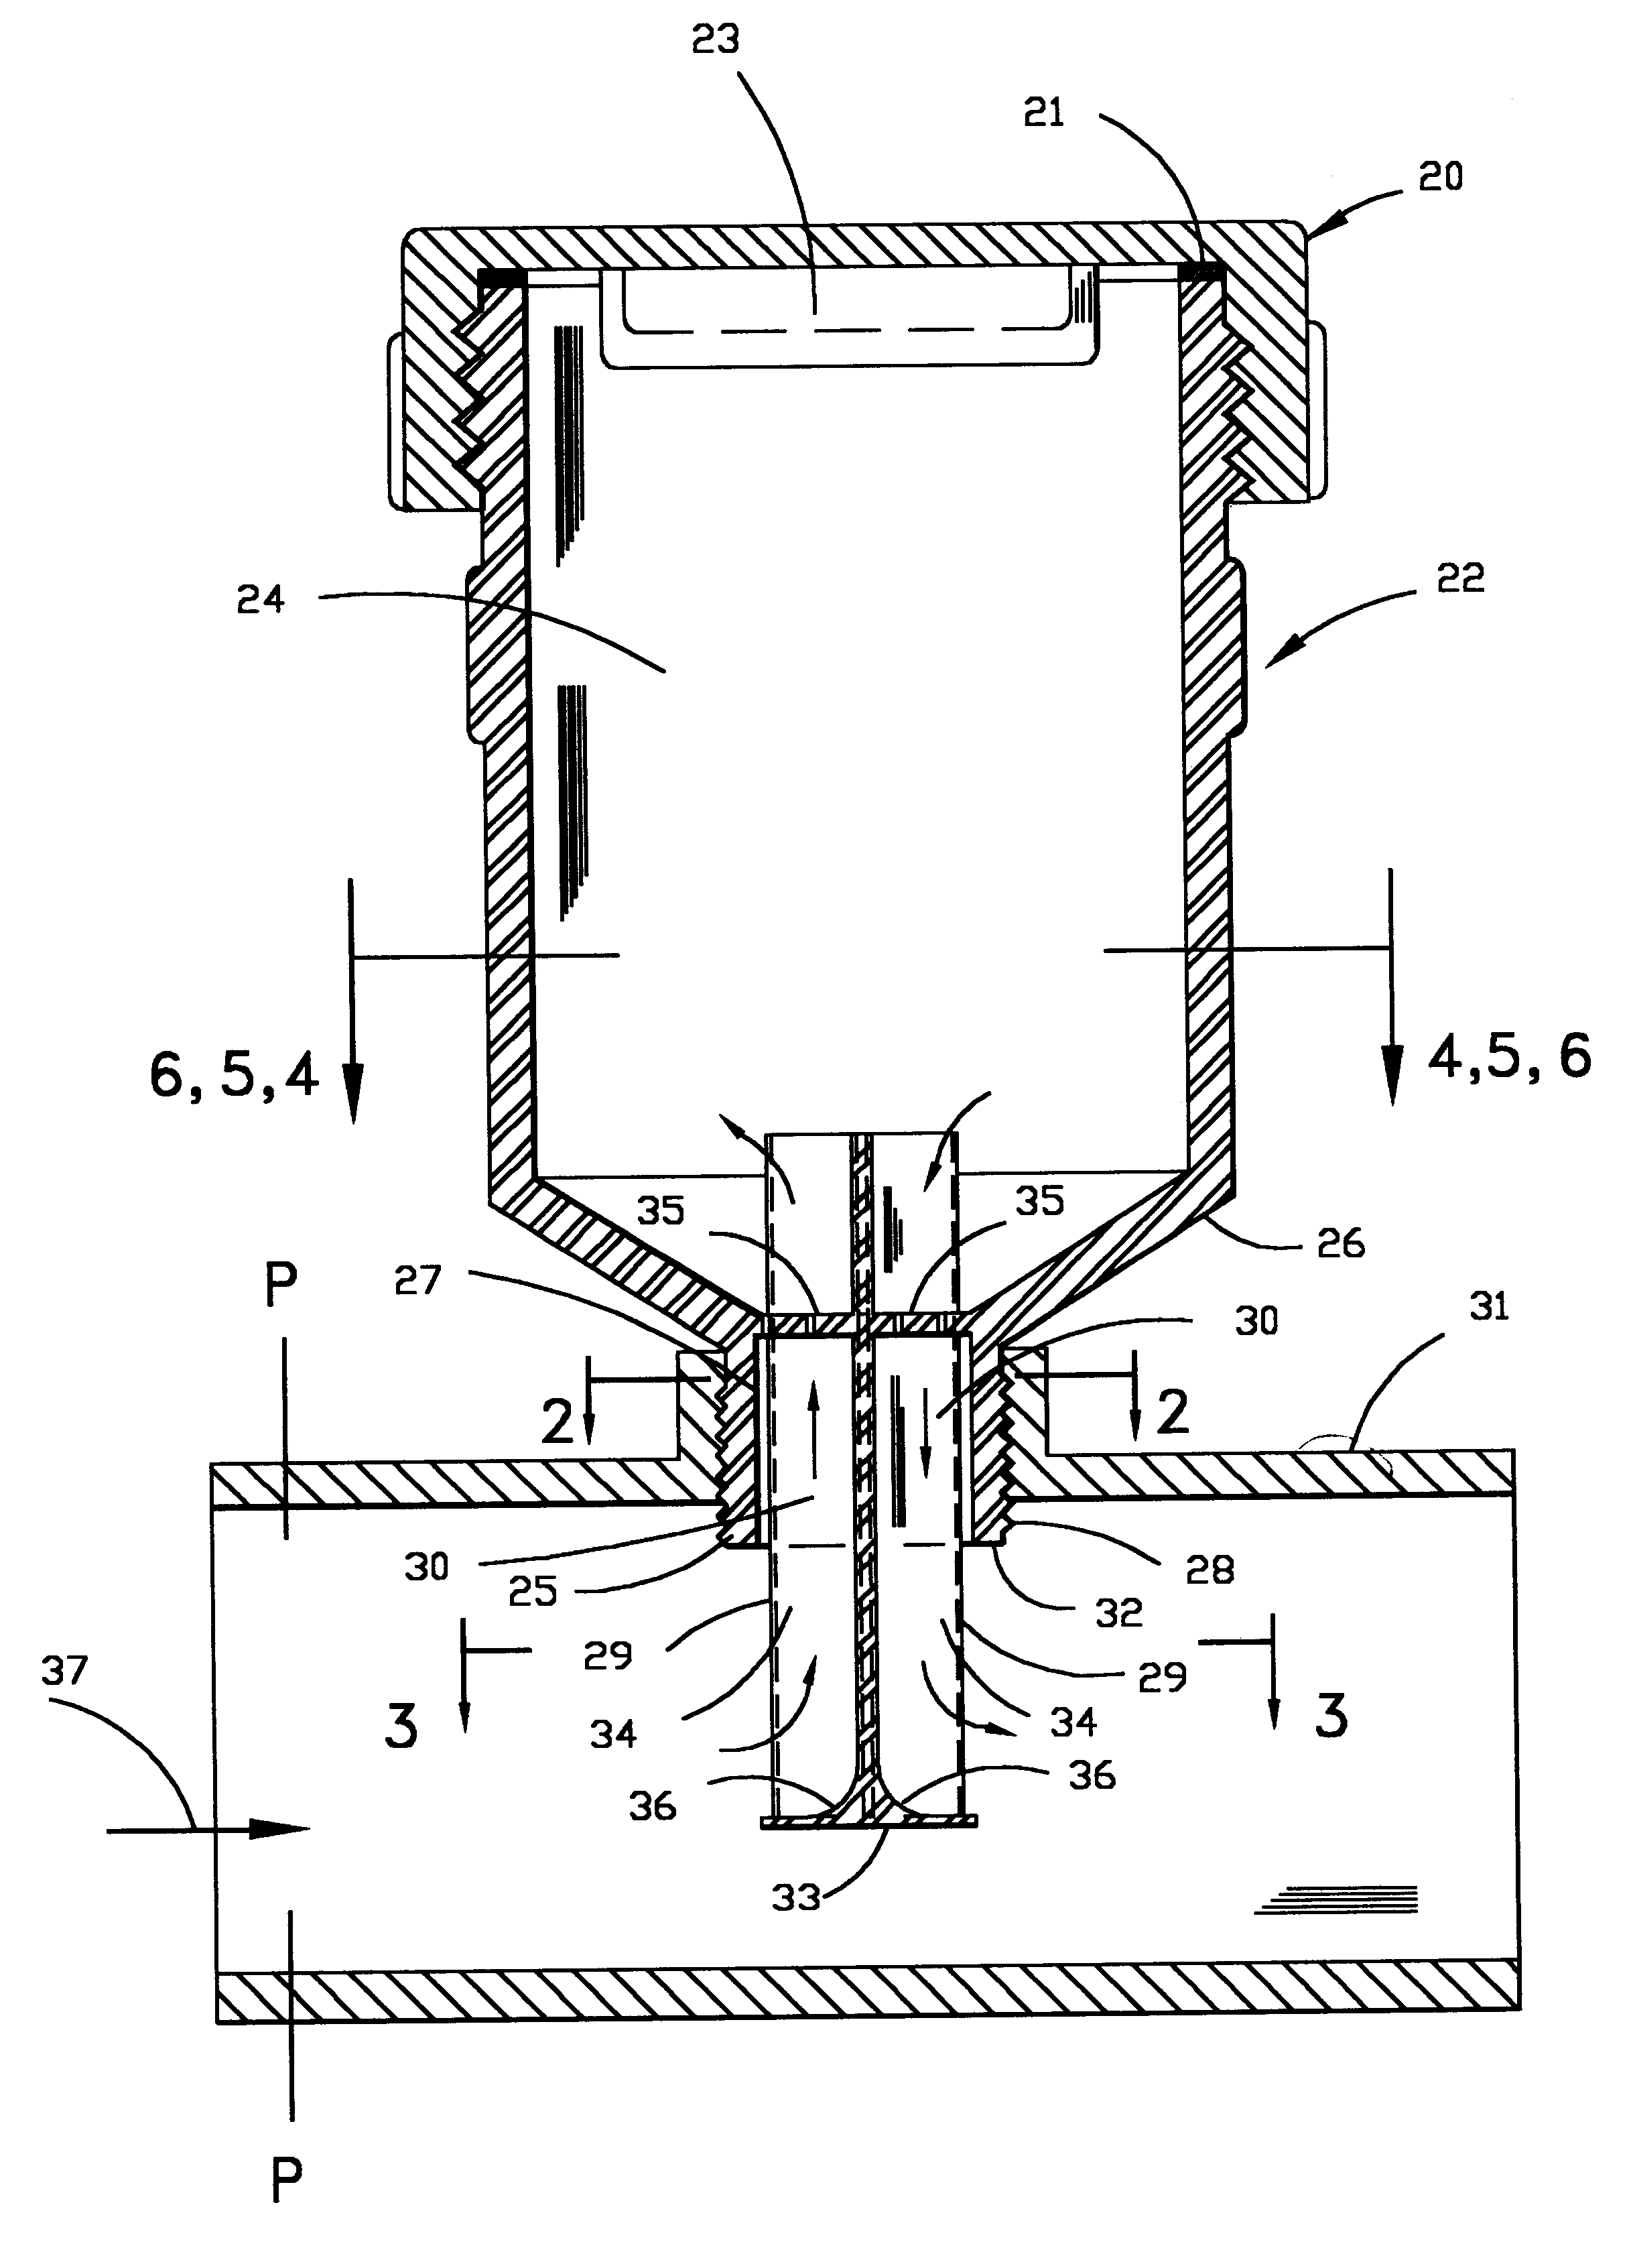 Applicators for allowing a predetermined fluid flow for dissolving and distributing soluble substances